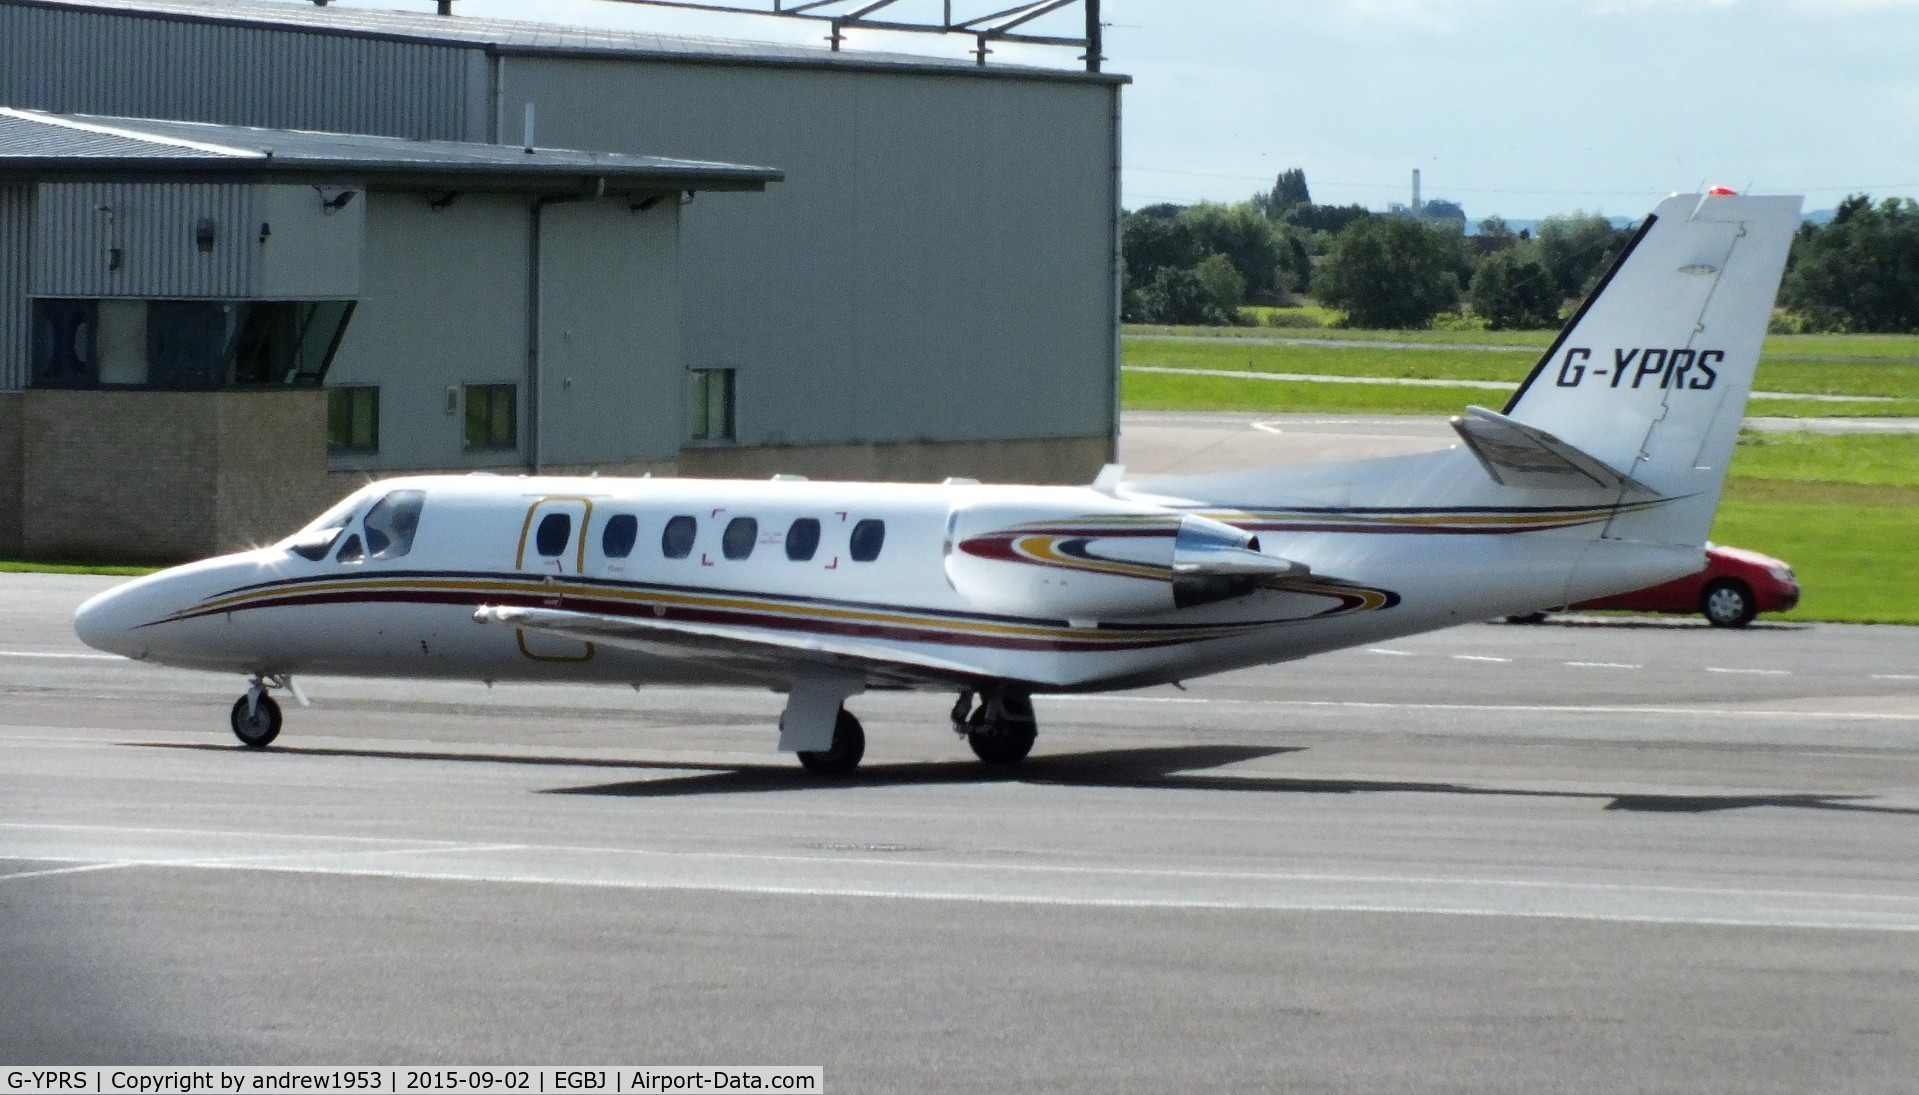 G-YPRS, 2000 Cessna 550 Citation Bravo C/N 550-0935, G-YPRS at Gloucestershire Airport.